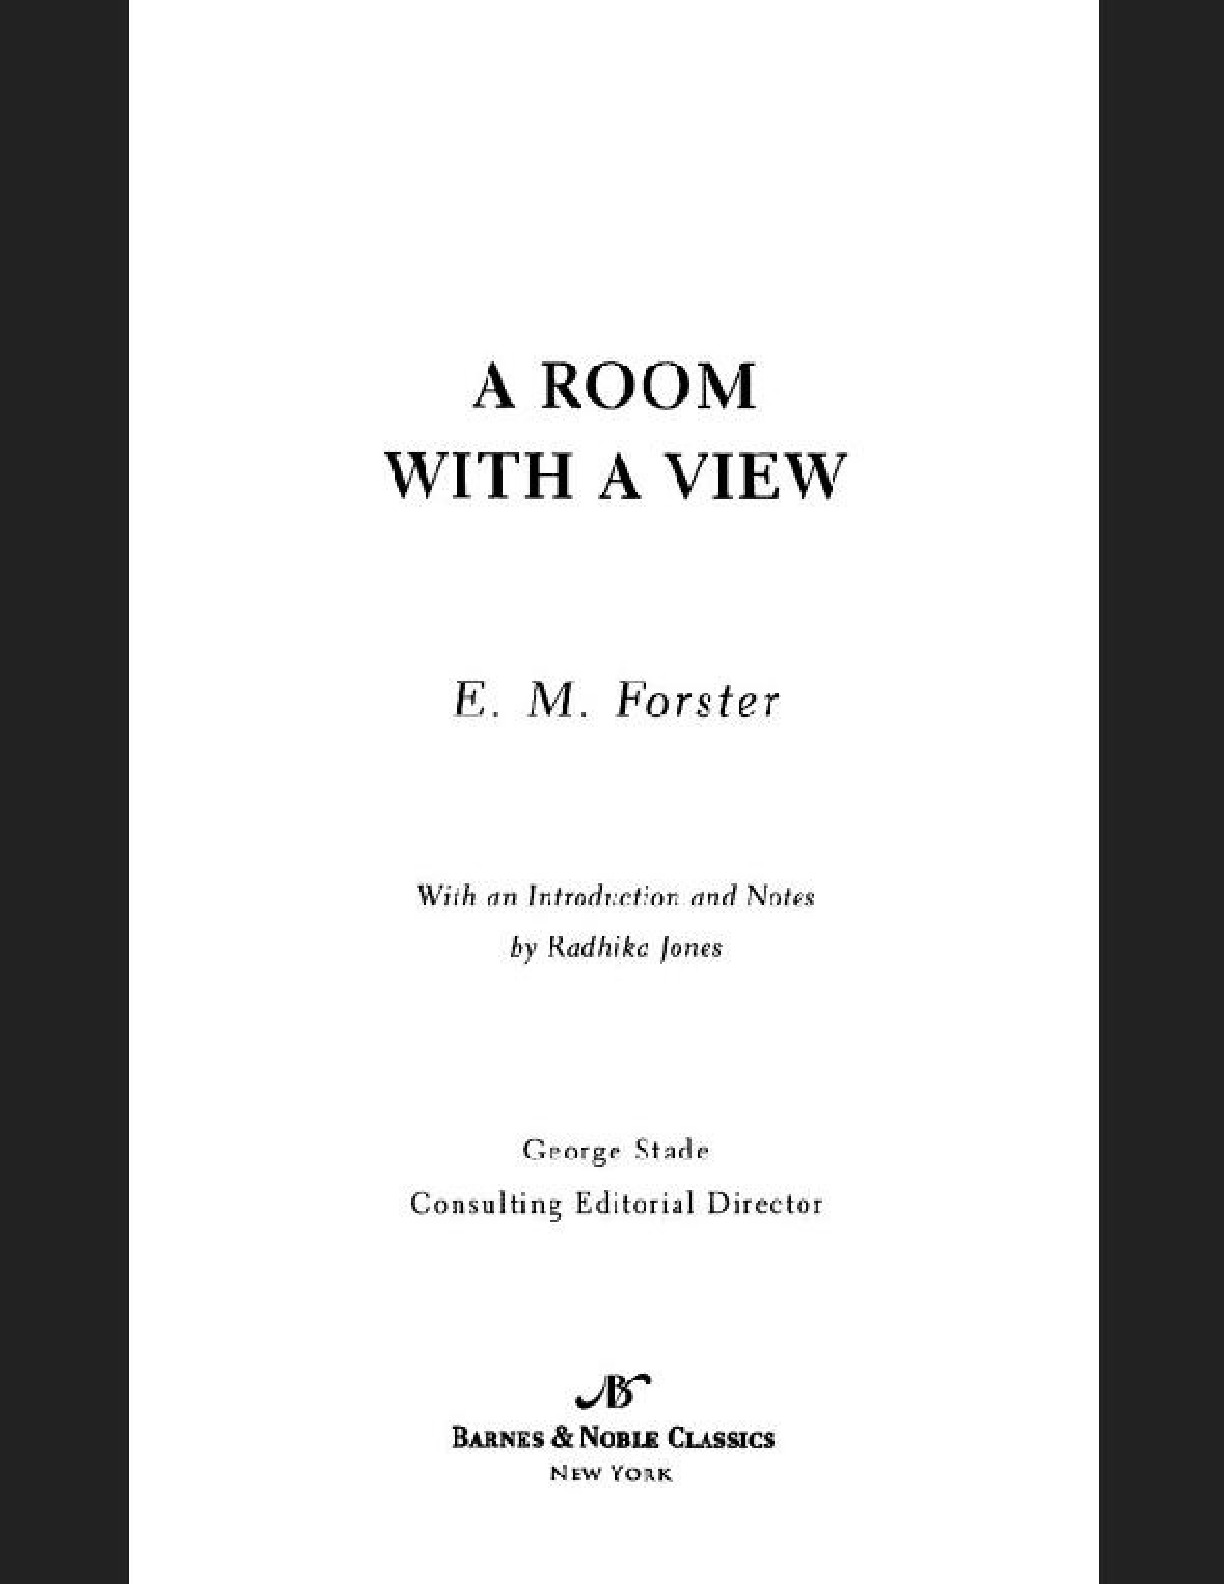 Room with a View, A – E. M. Forster